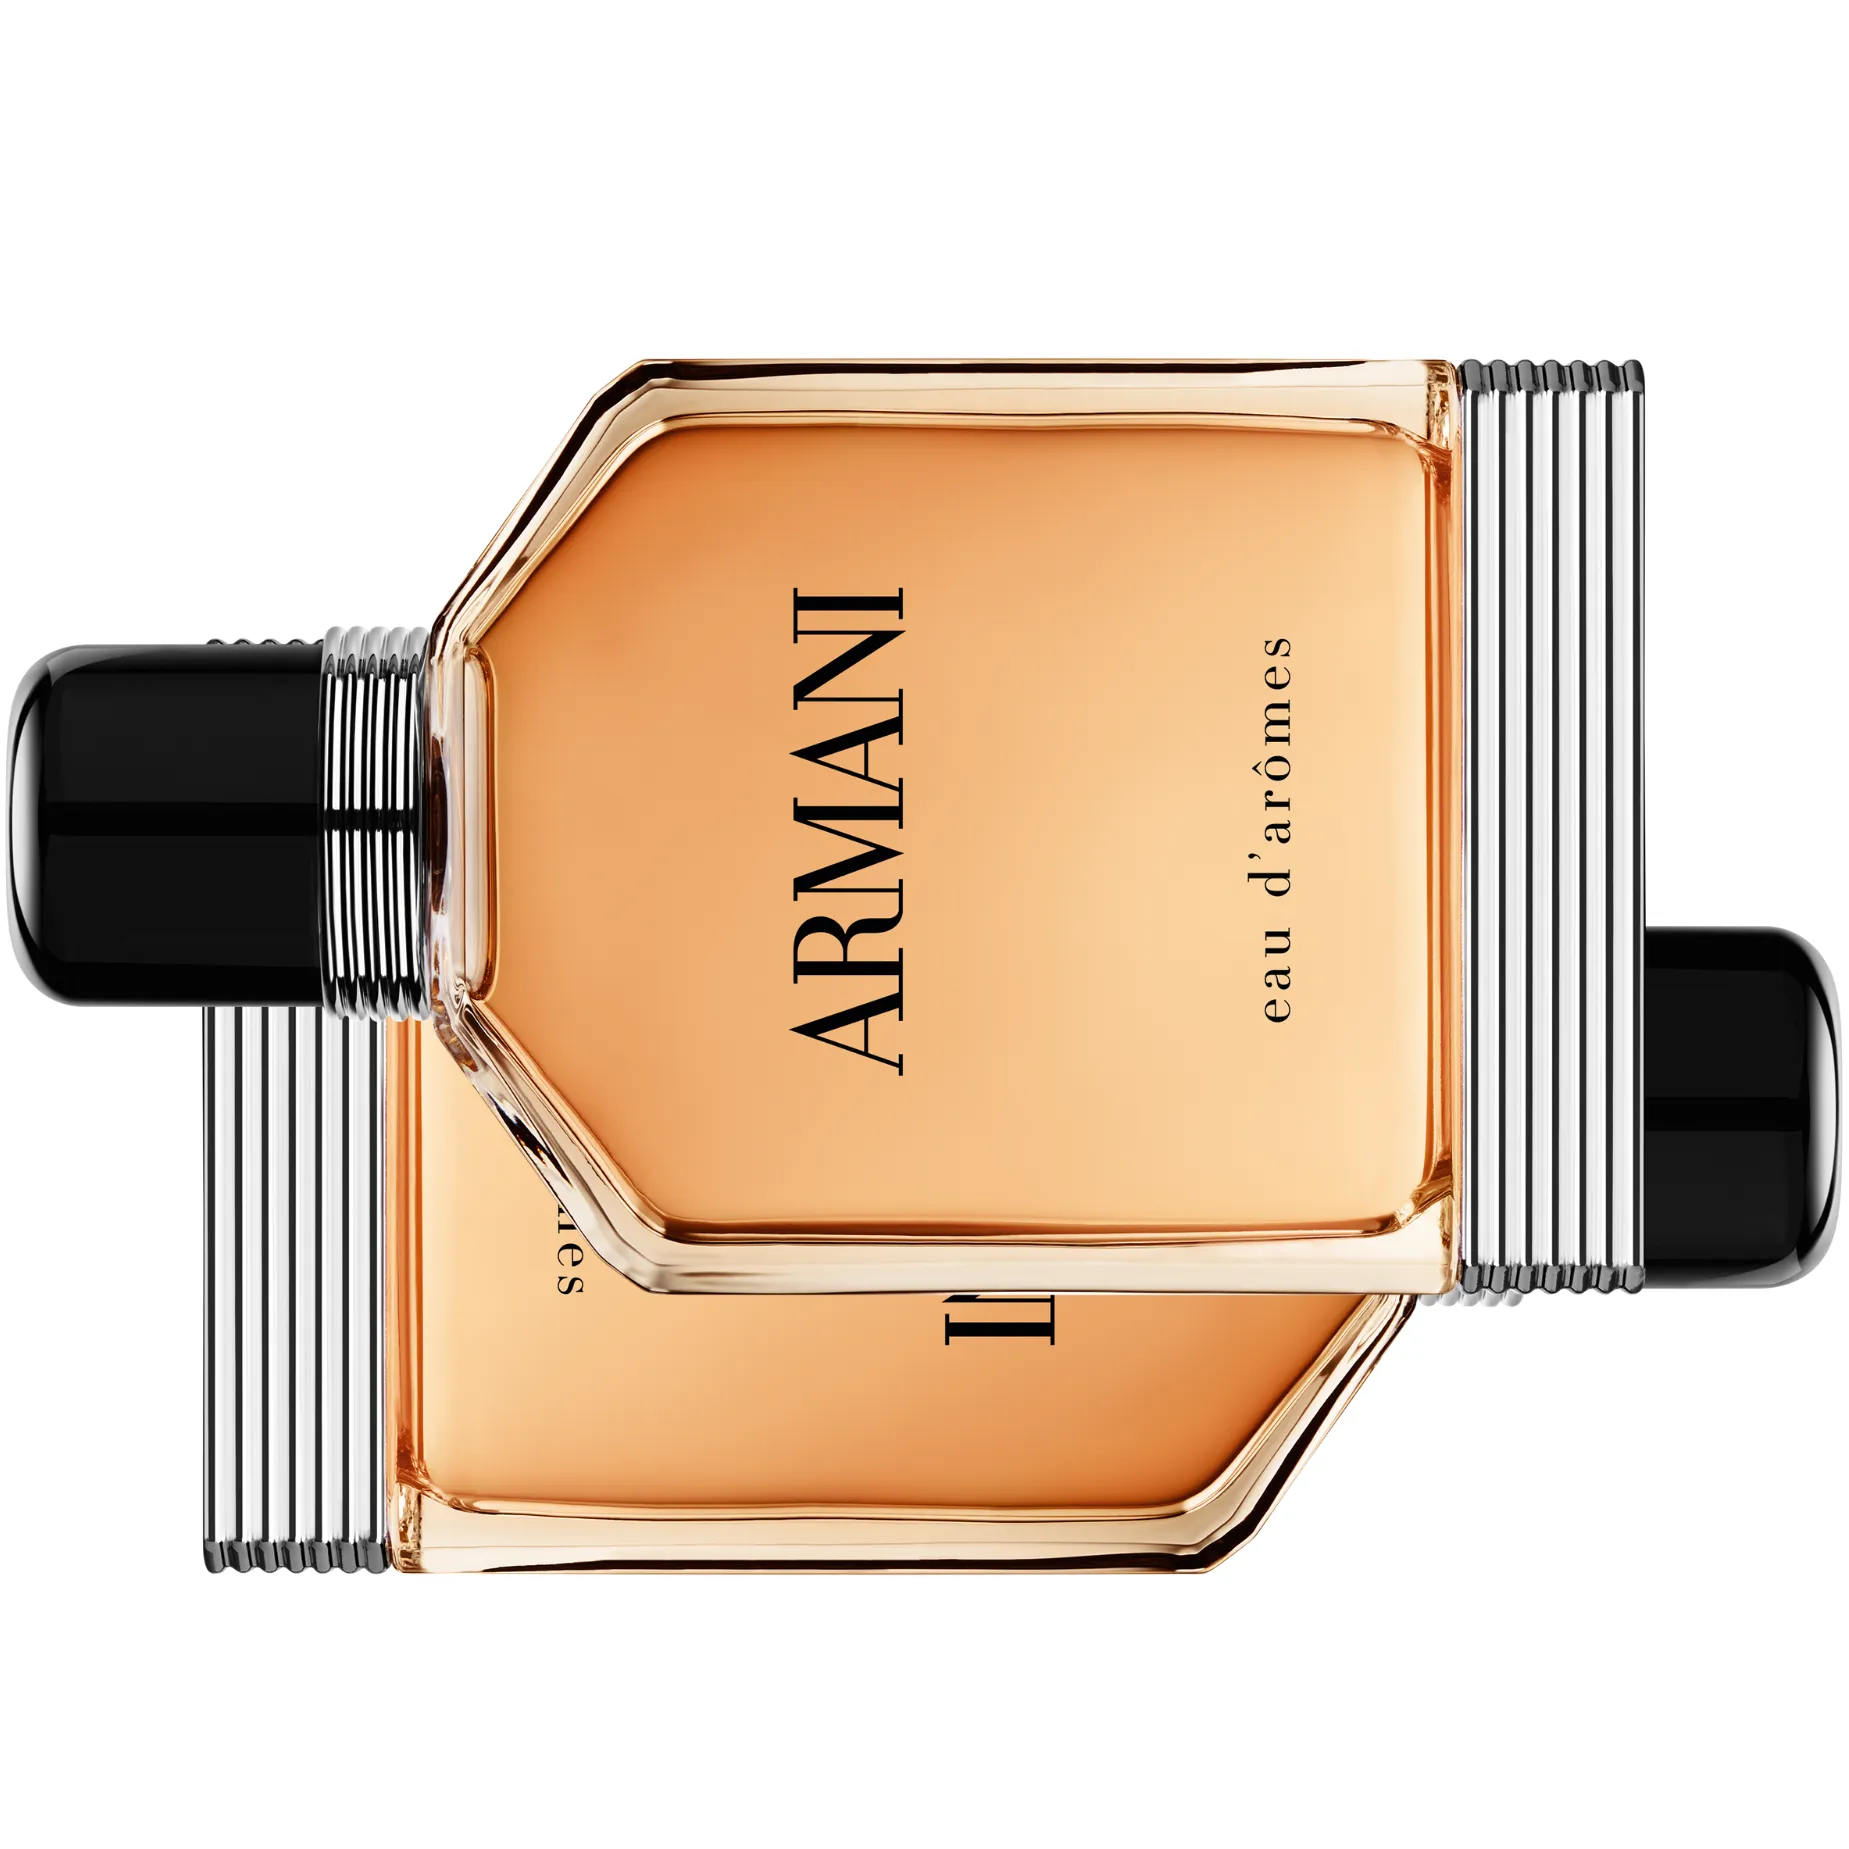 Free Armani Fragrance In Exchange For A Review